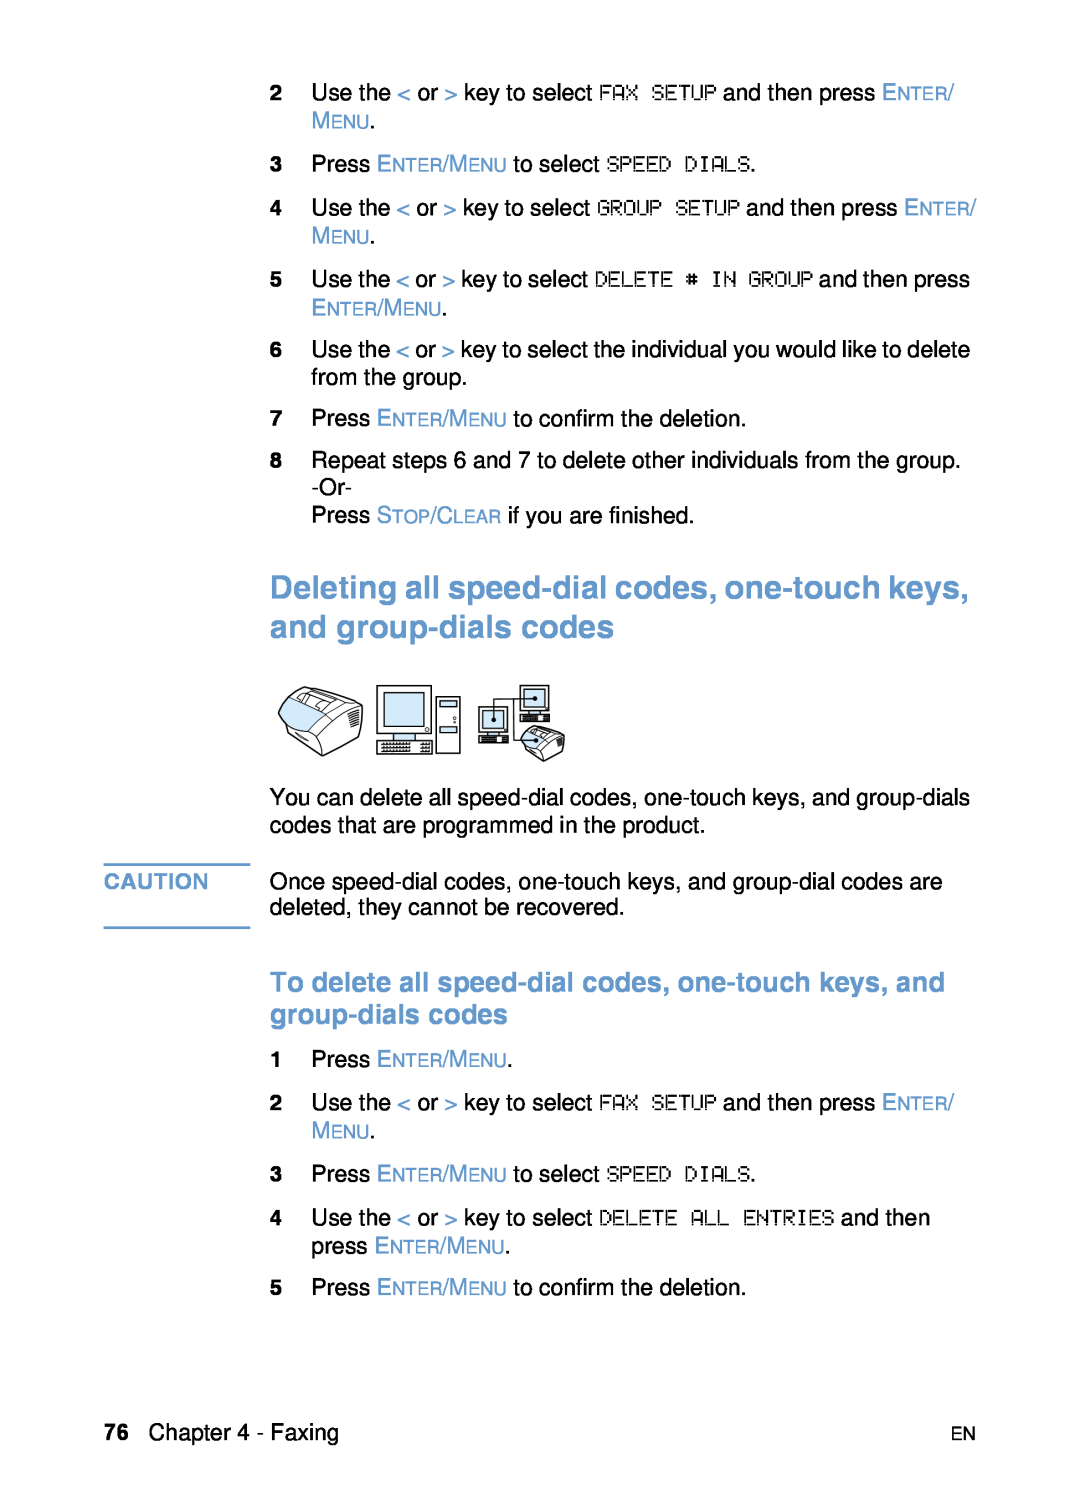 HP 3200 manual Deleting all speed-dial codes, one-touch keys, and group-dials codes 